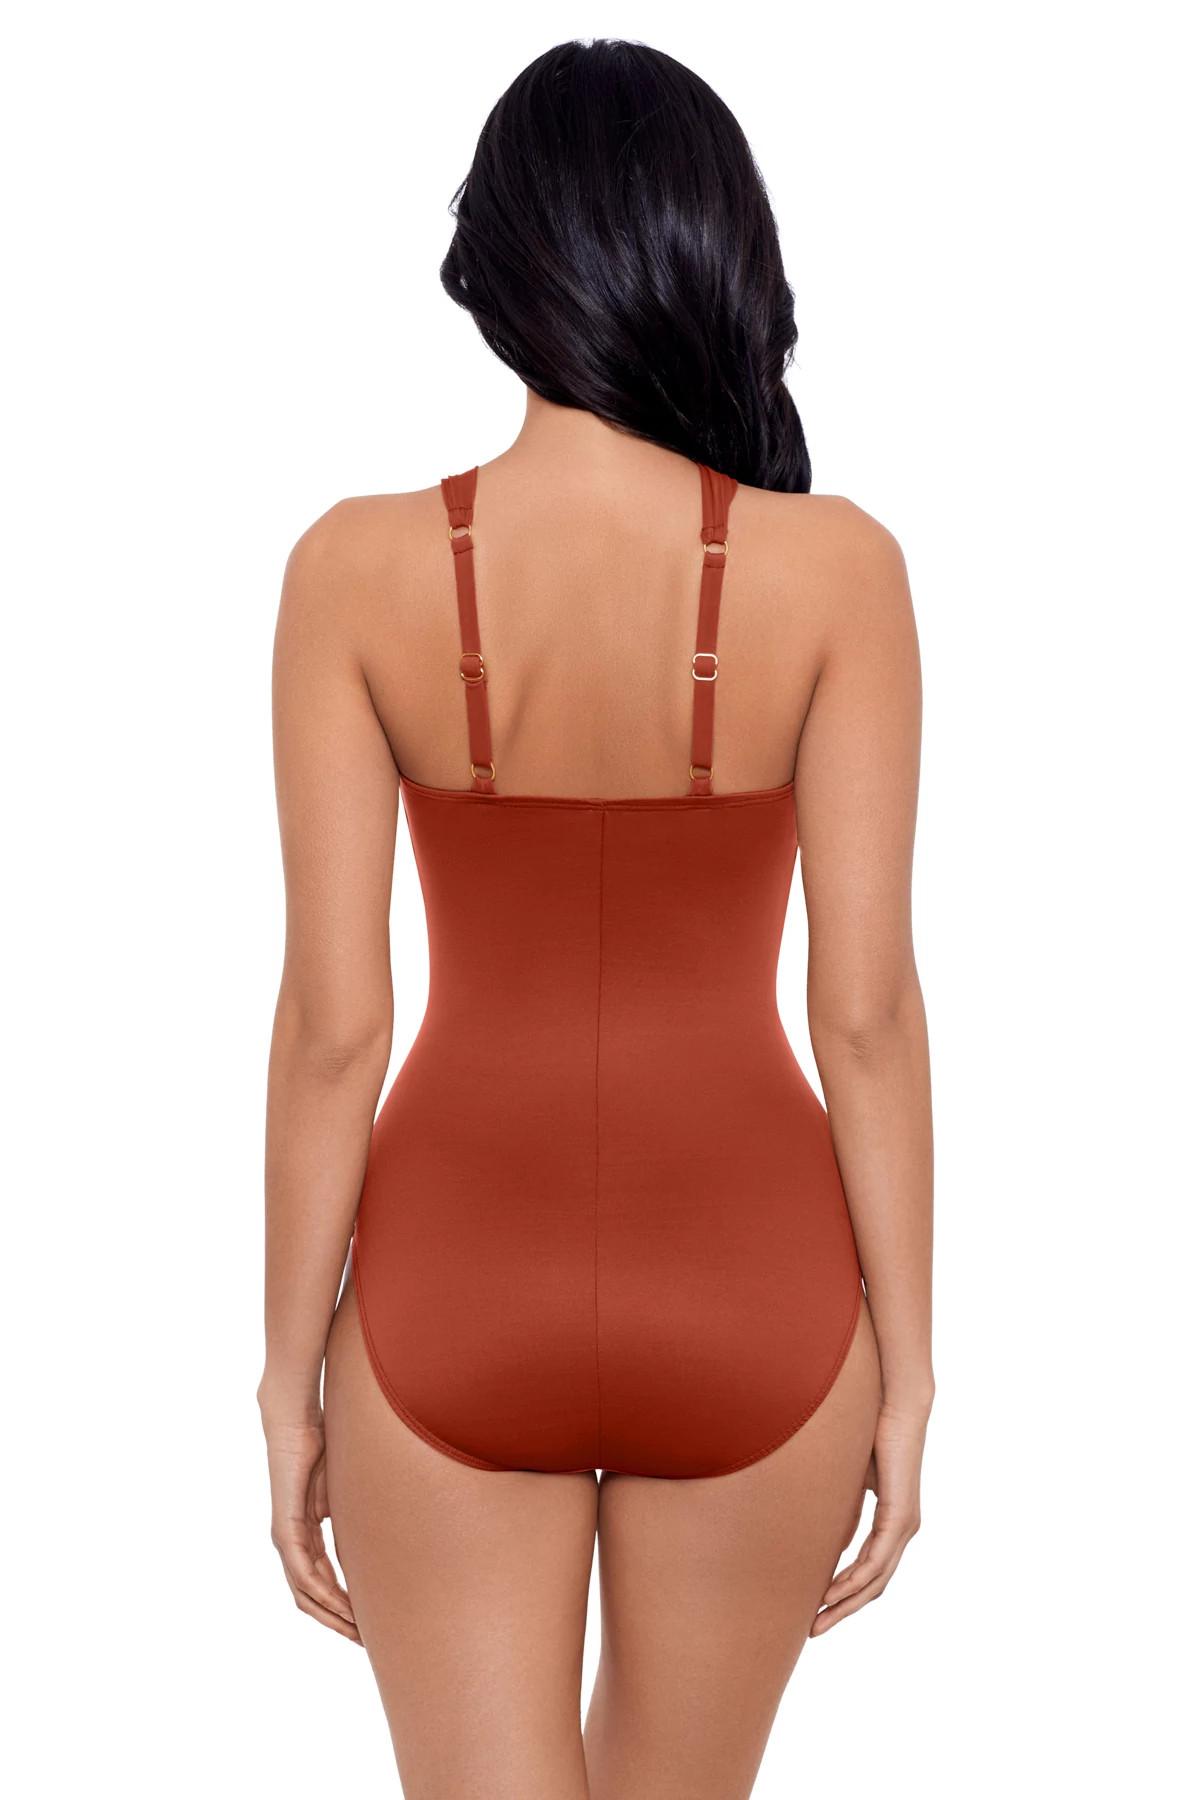 SPICE Rock Solid Europa Asymmetrical One Piece Swimsuit  image number 2